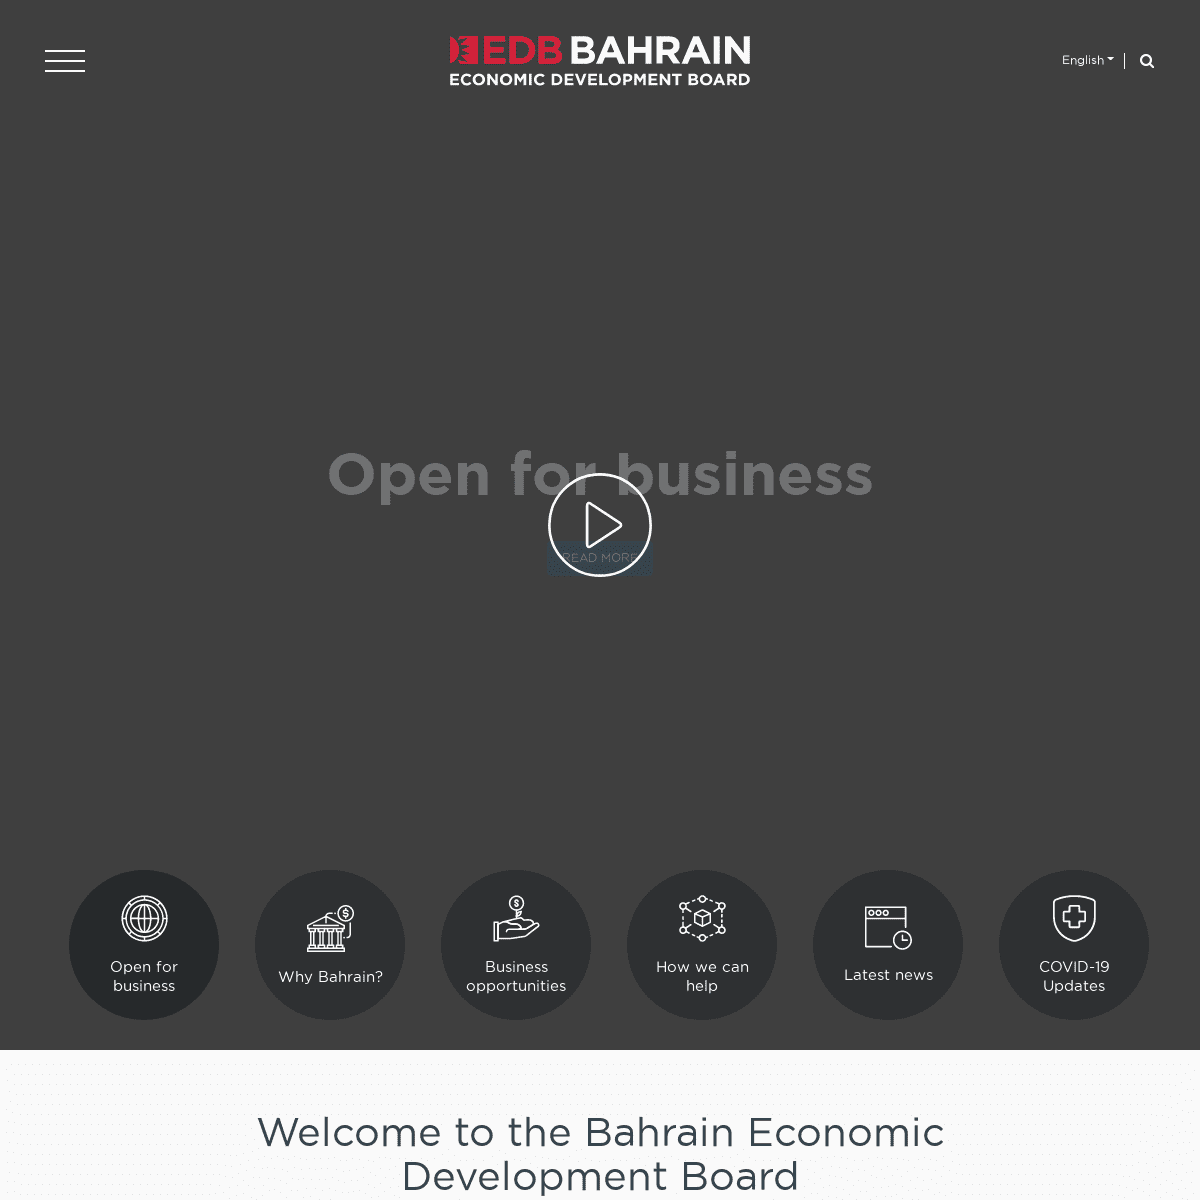 A complete backup of https://bahrainedb.com